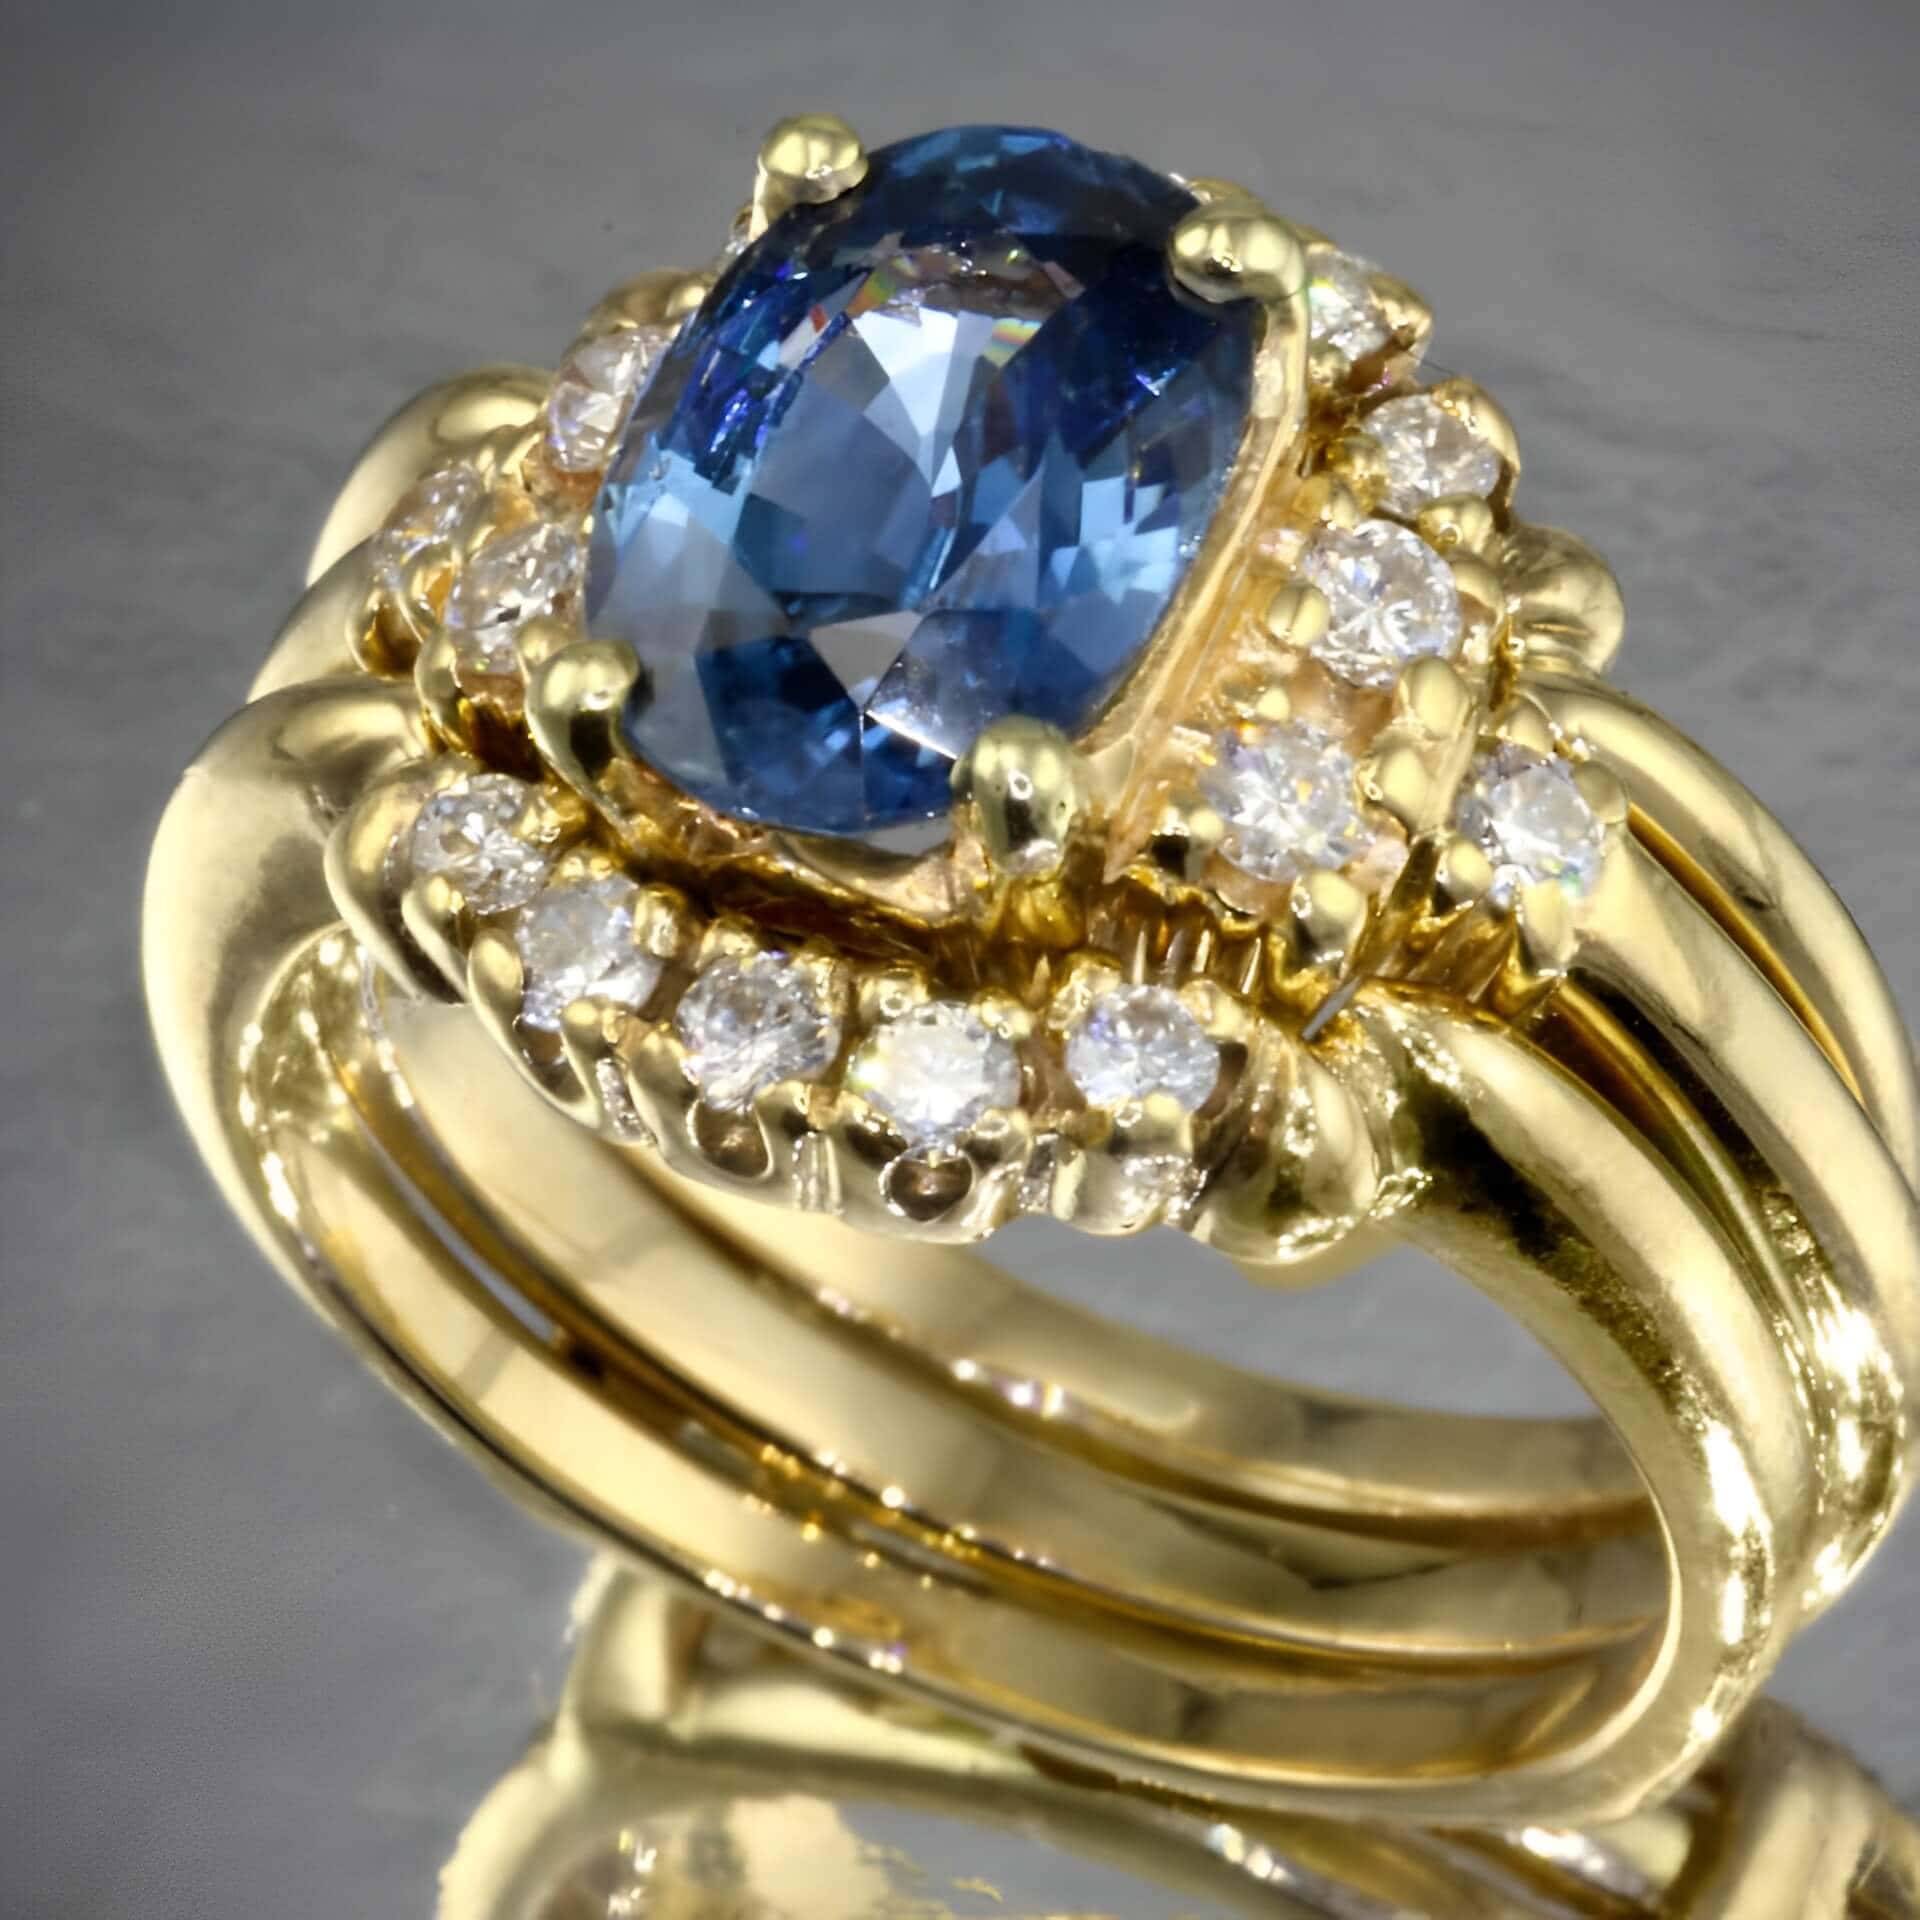 blue sapphire engagement ring in yellow gold setting